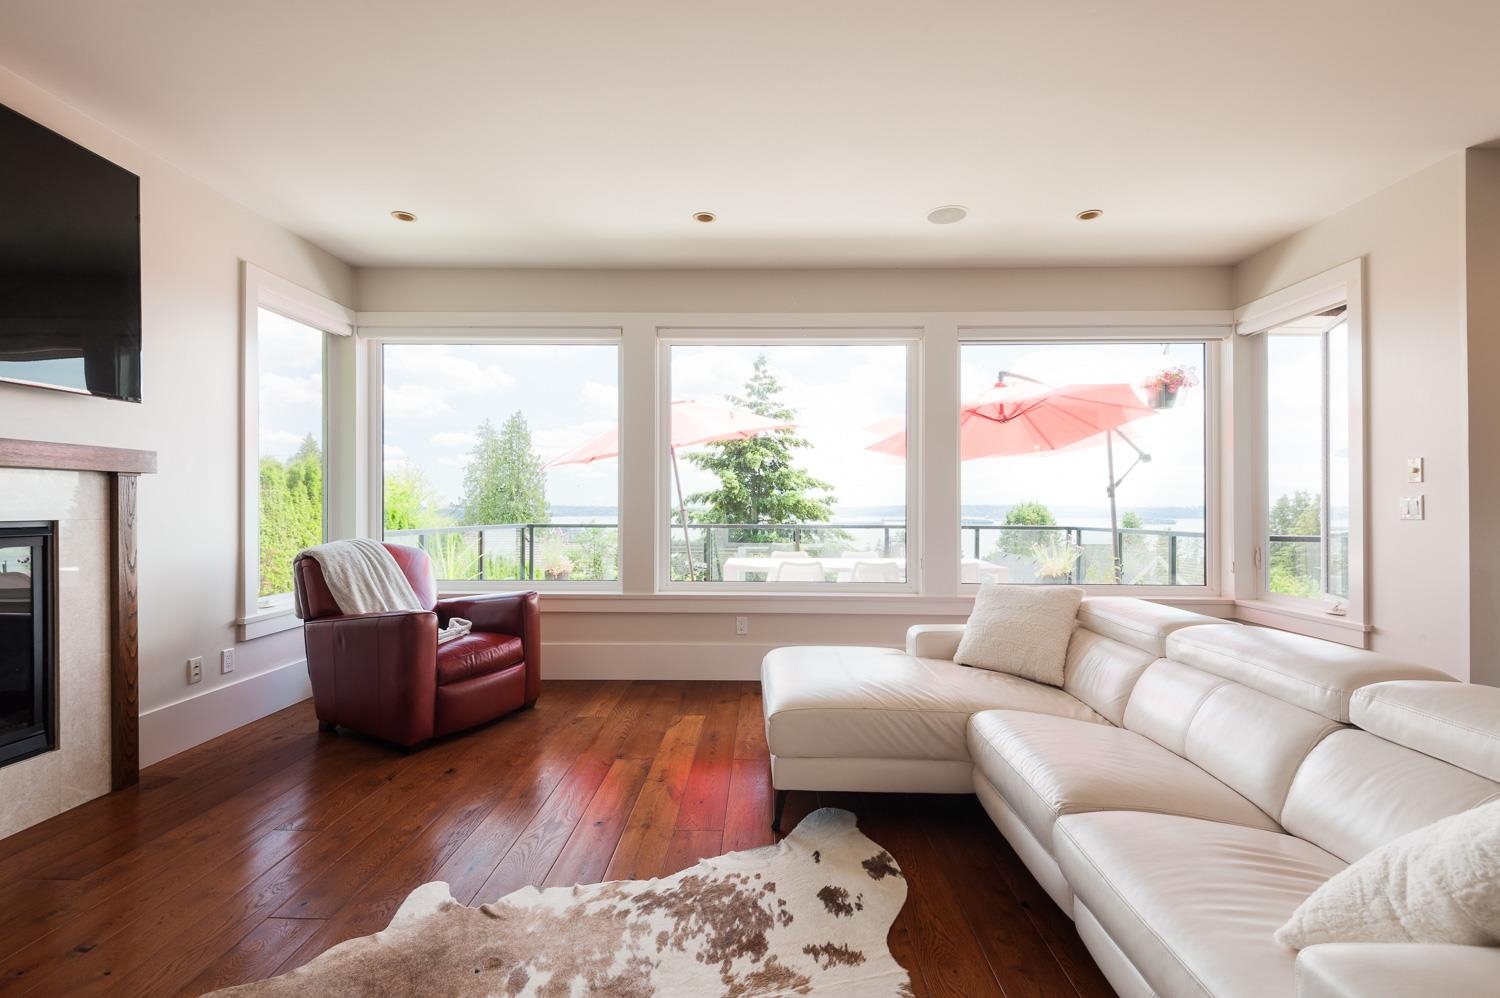 Listing image of 2380 PALMERSTON AVENUE